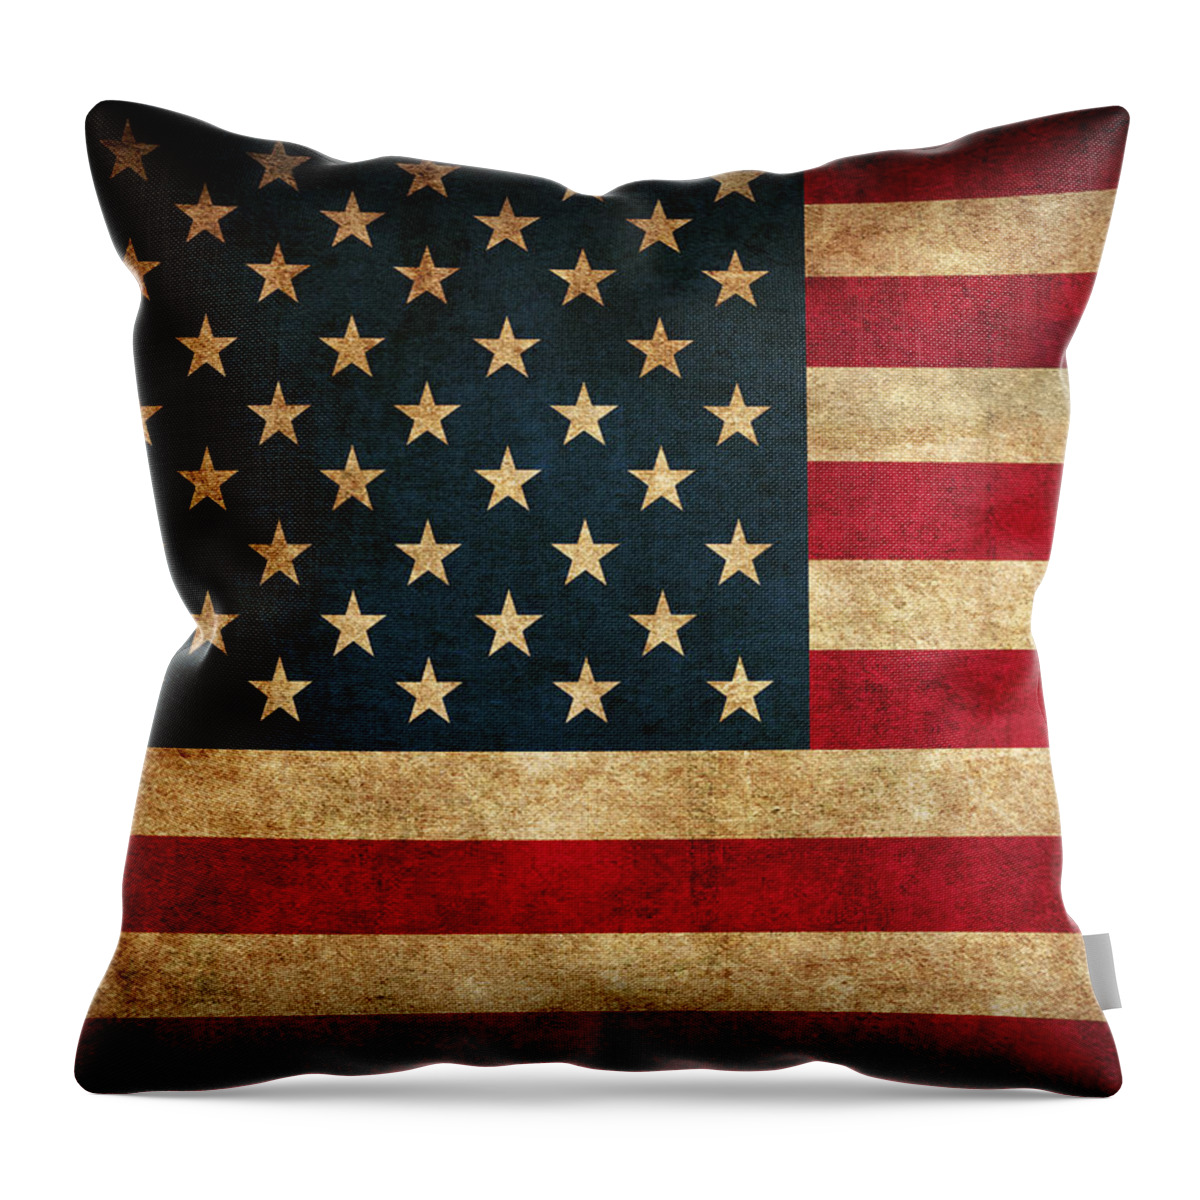 United States American Usa Flag Vintage Distressed Finish On Worn Canvas Throw Pillow featuring the mixed media United States American USA Flag Vintage Distressed Finish on Worn Canvas by Design Turnpike